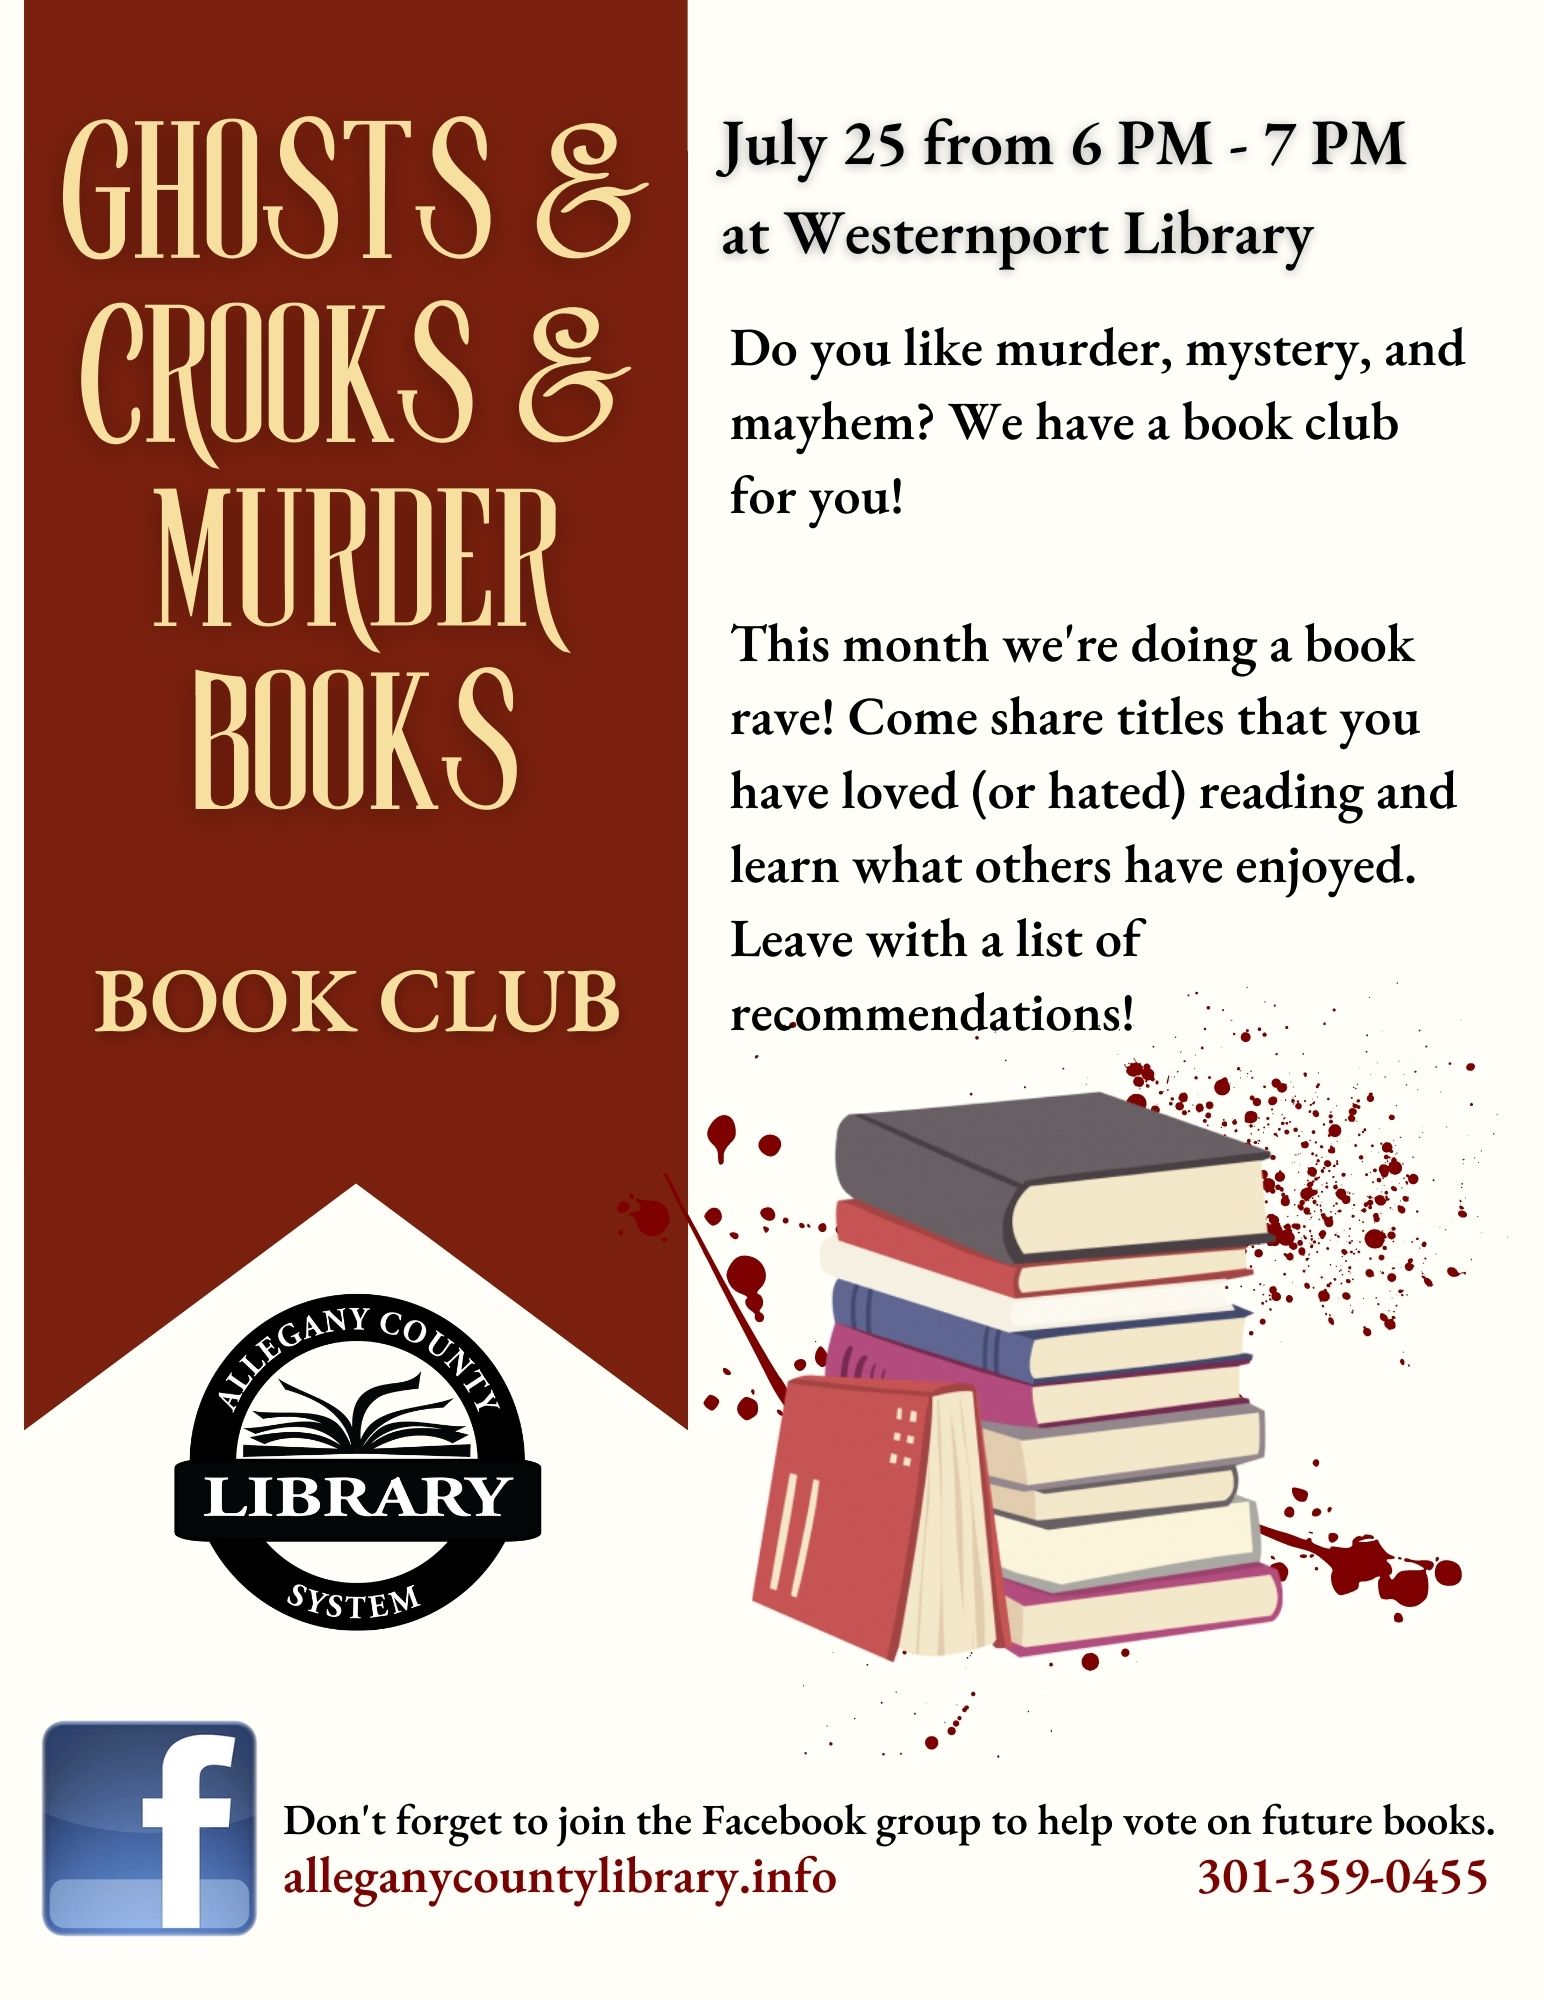 Ghosts, Crooks and murder books bookclub flyer